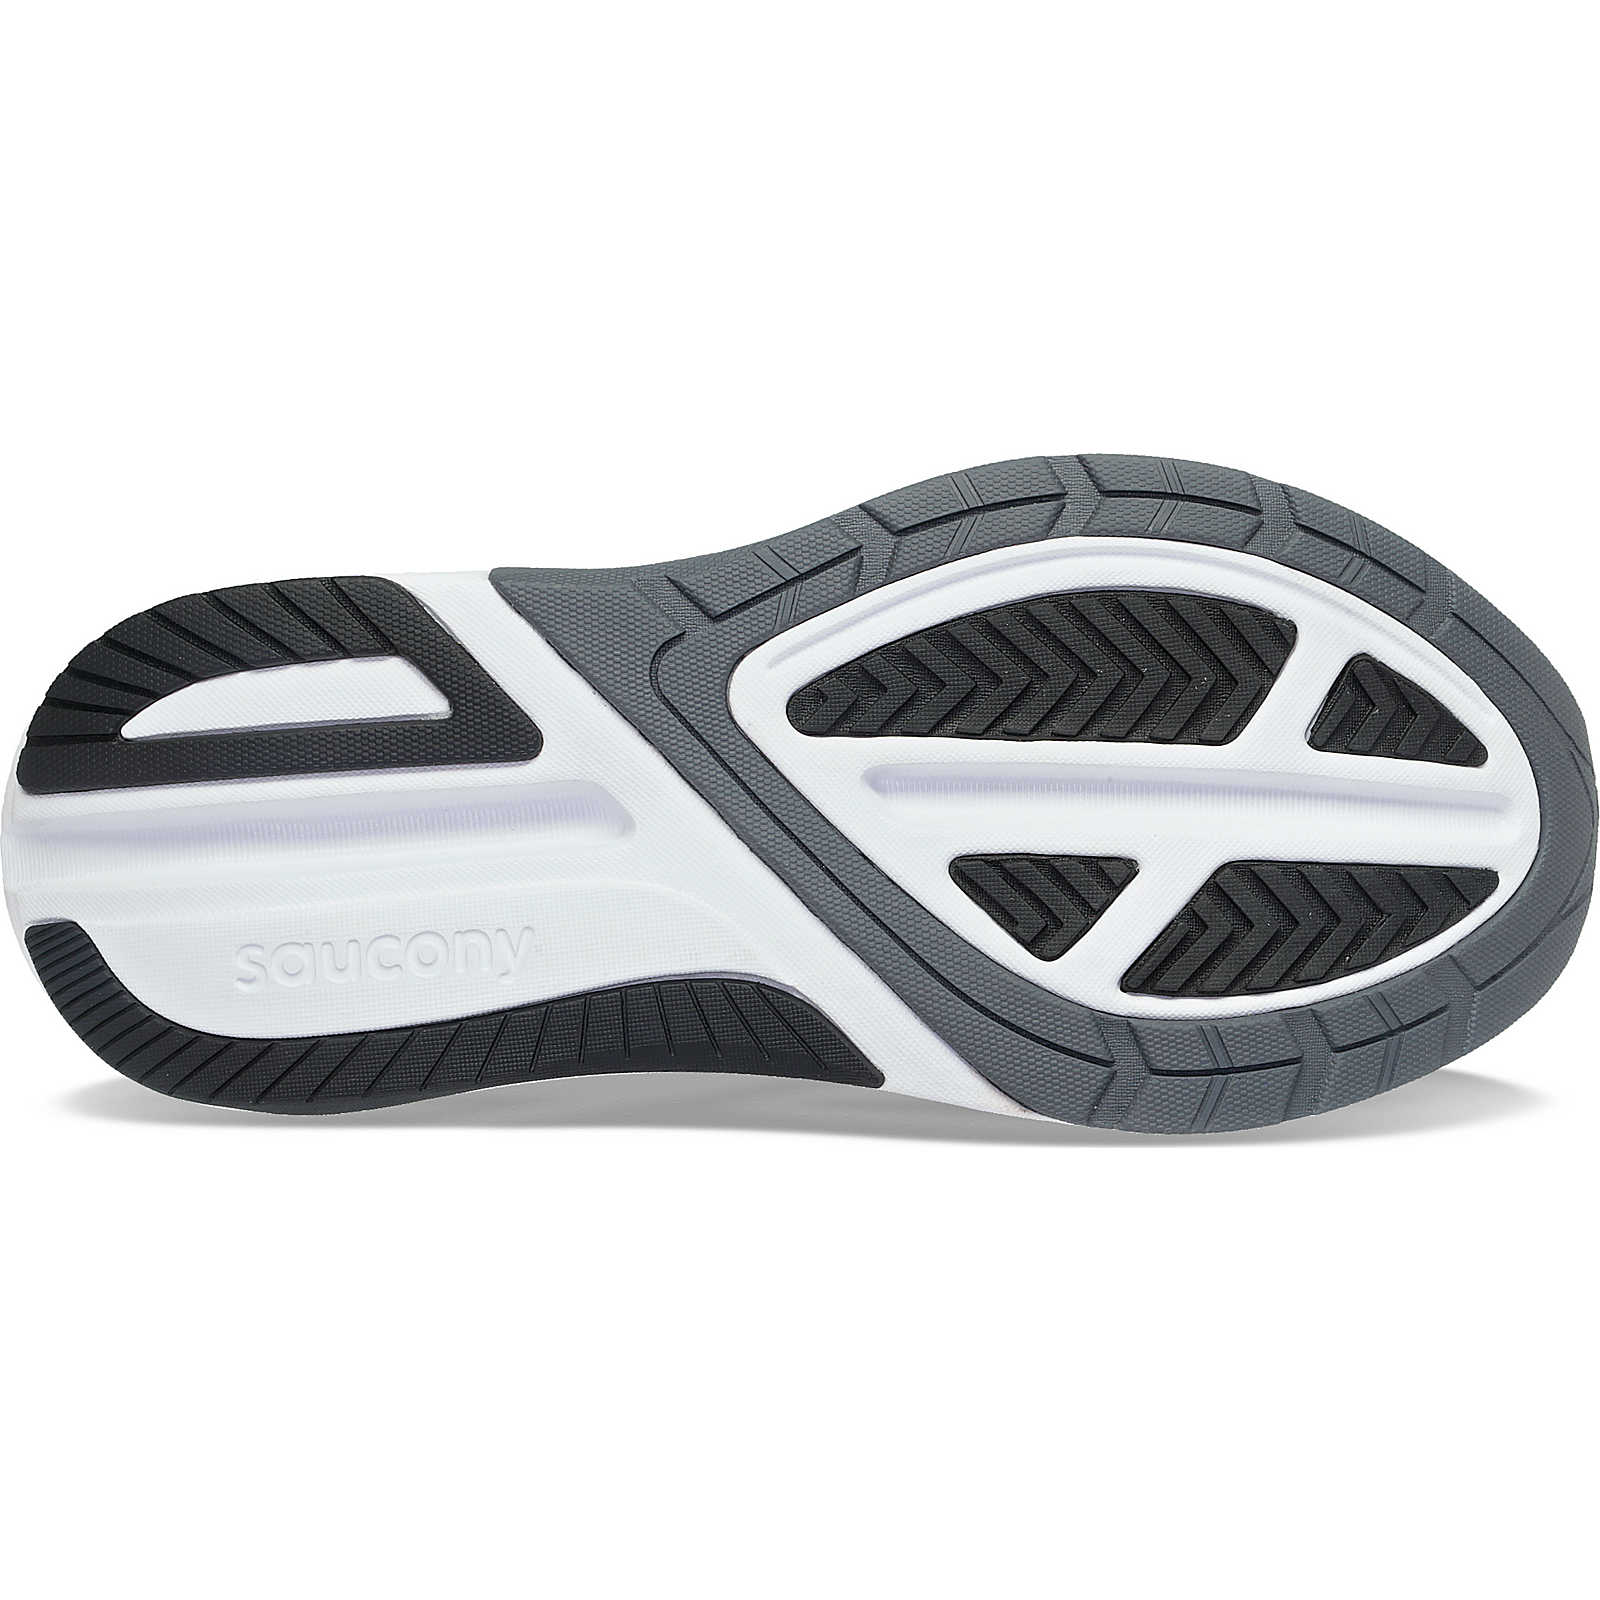 Durable rubber outsole with supportive wrapping at the midfoot